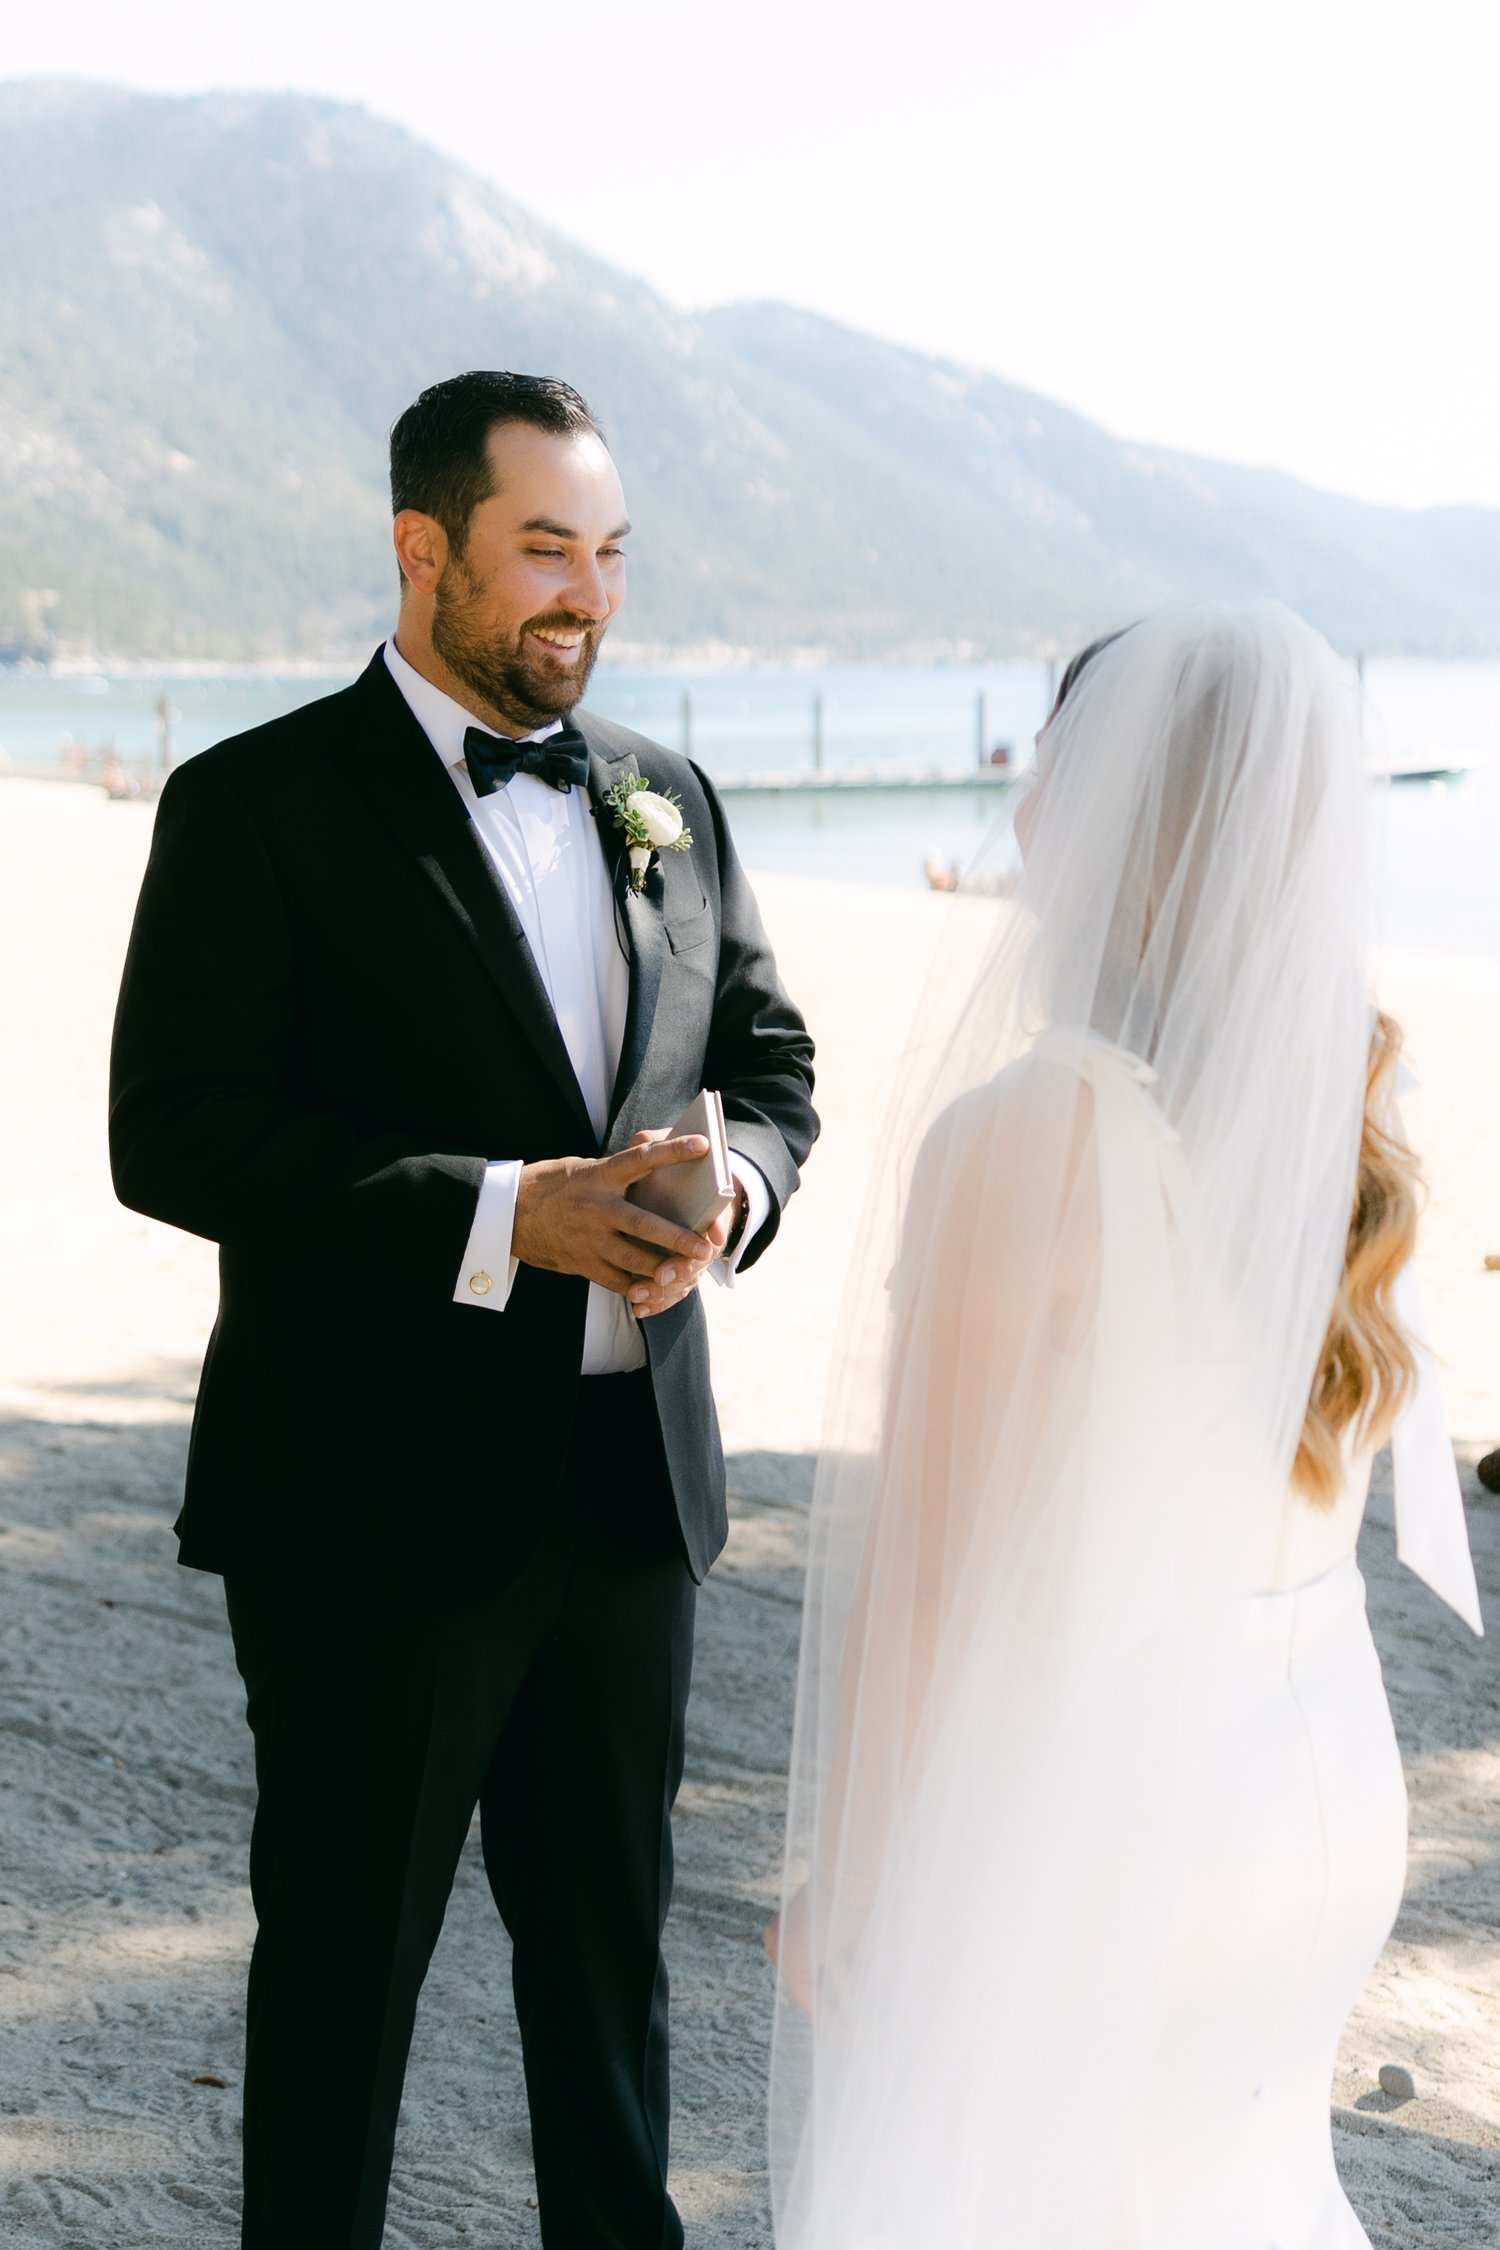 Hyatt Lake Tahoe wedding, photo of couple having a private vow reading